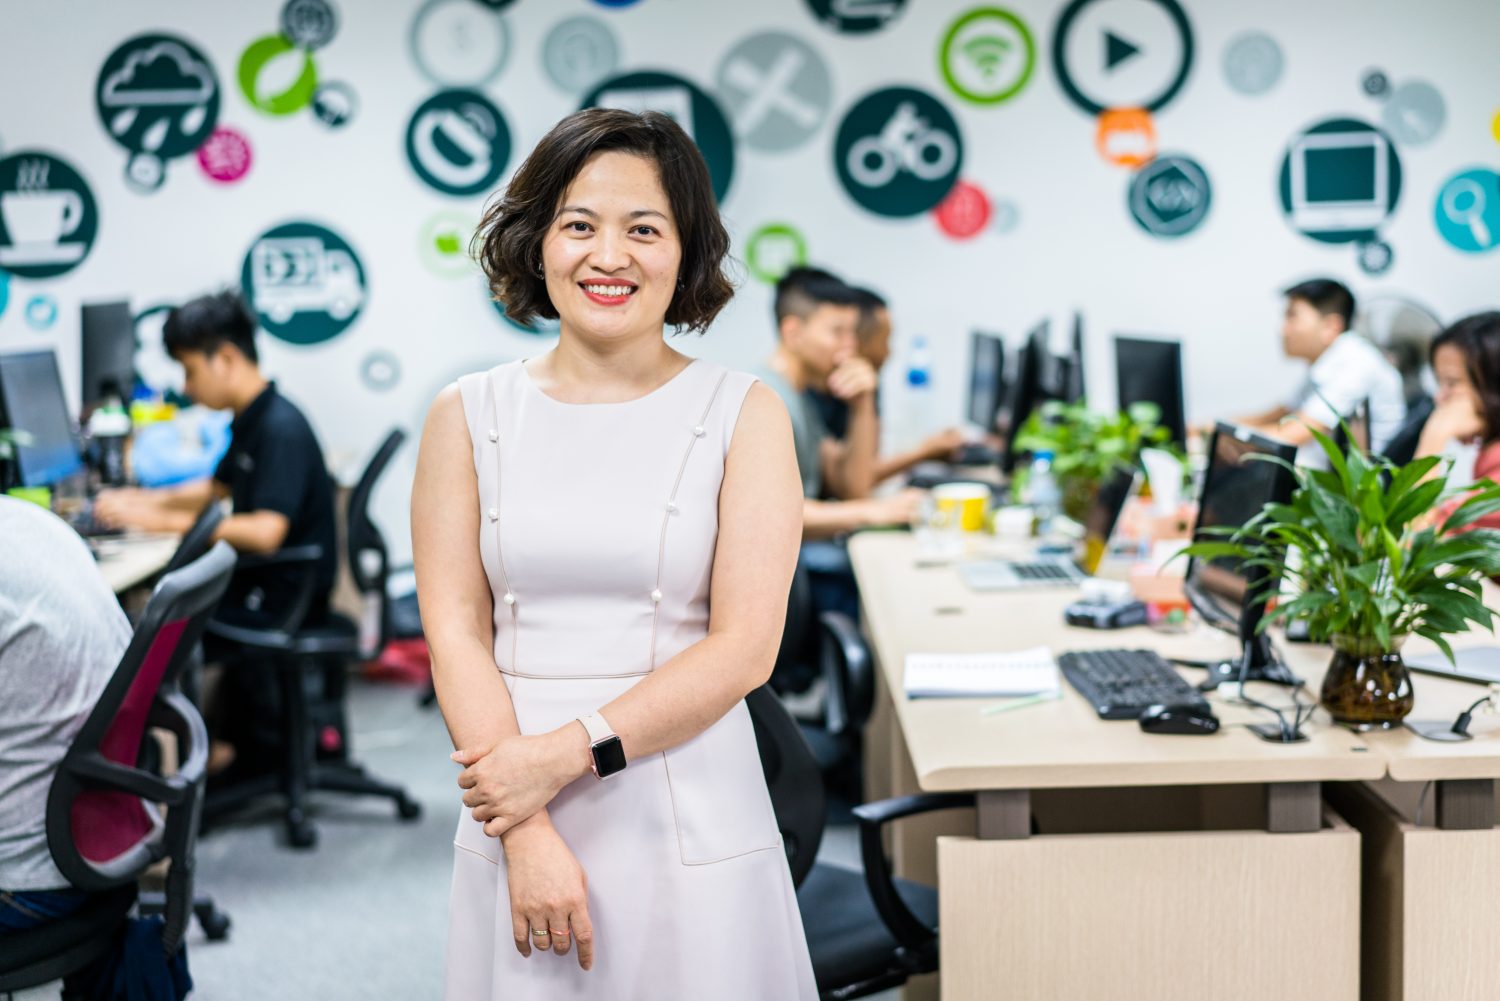 Van Dang CEO at Savvycom and former mentee and mentor poses in her office as employees work behind her